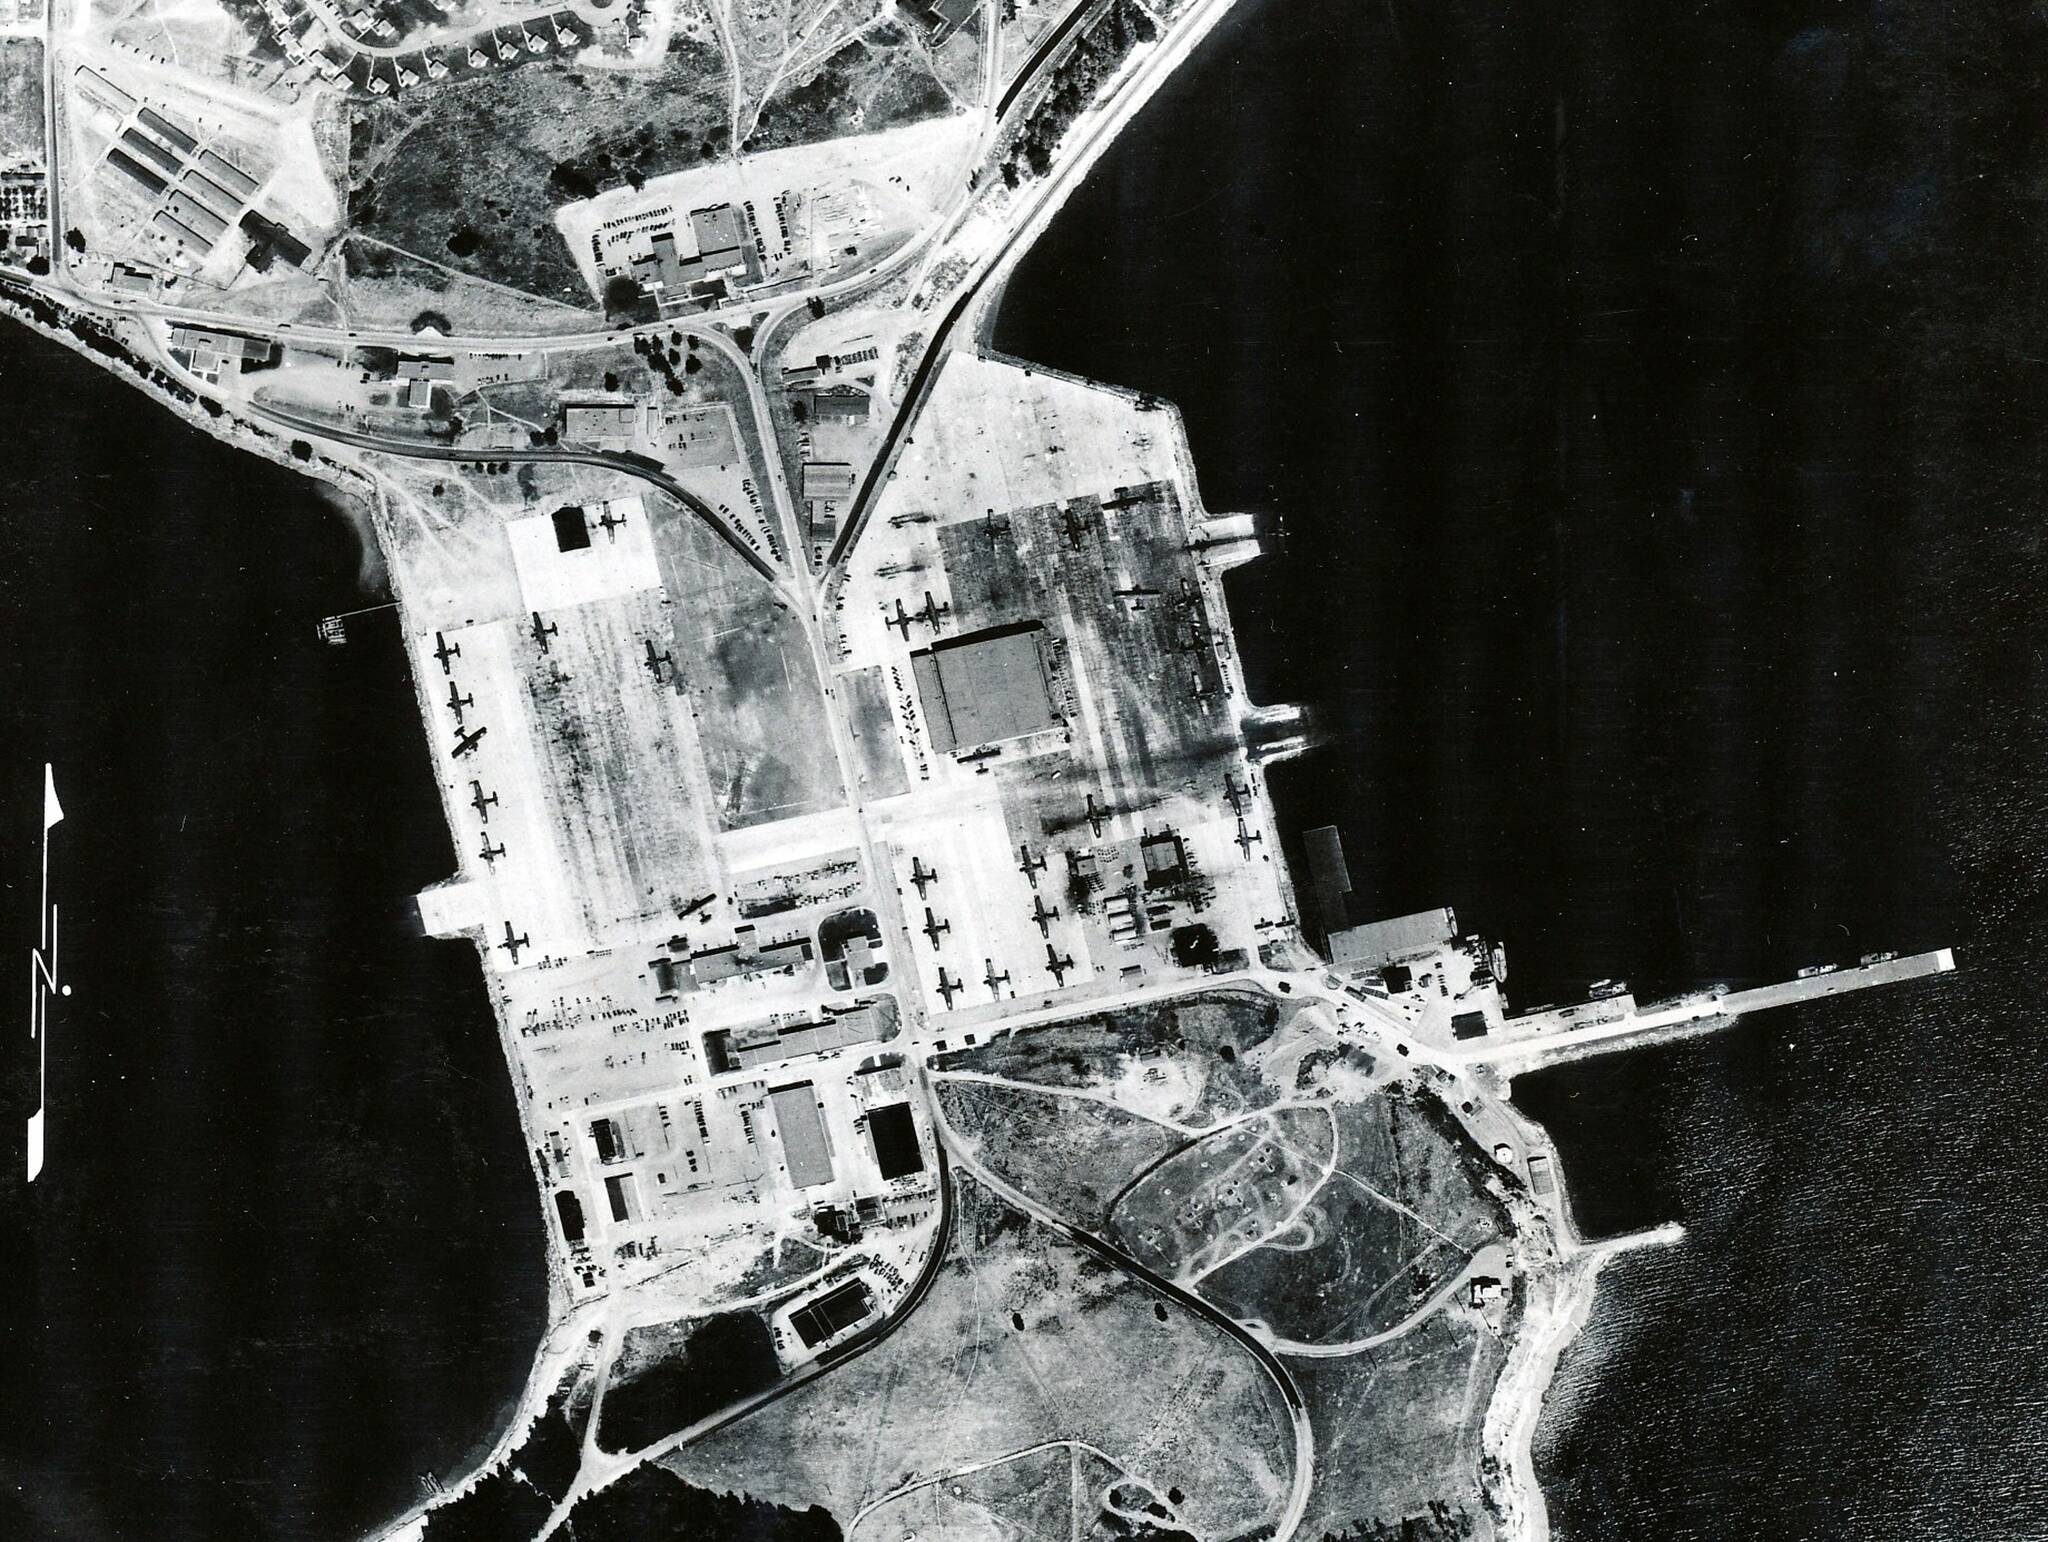 Naval Air Station Whidbey Island sea plane base in the 1940s. (Photo provided)